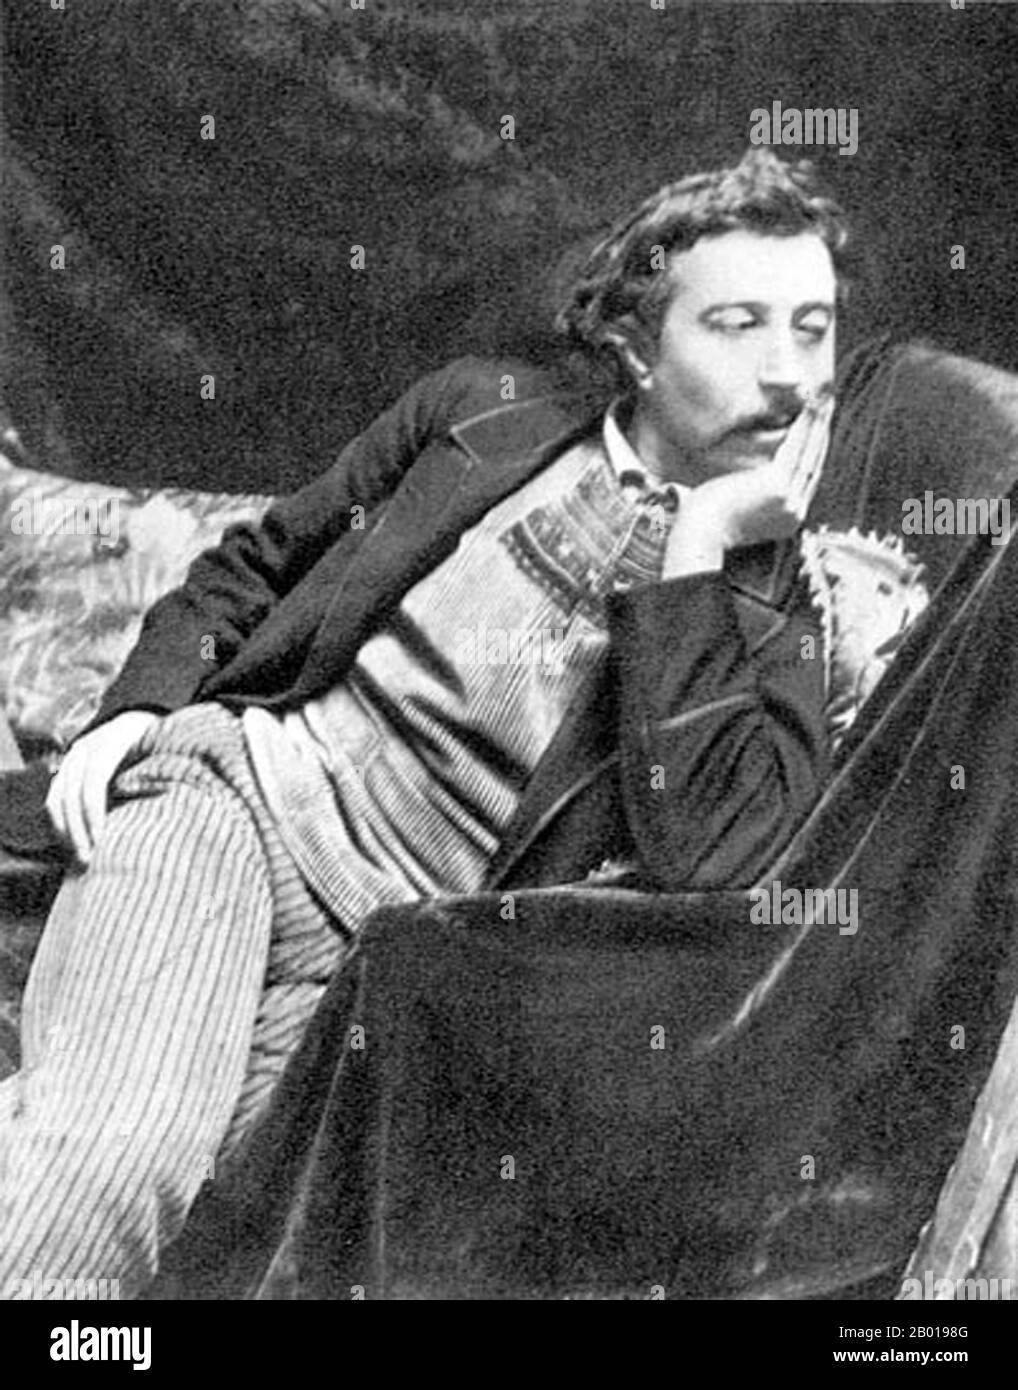 France/Tahiti: Eugène Henri Paul Gauguin (7 June 1848 - 8 May 1903). Photo by Louis-Maurice Boutet de Monvel (15 October 1851 - 16 March 1913), c. 1891.  Paul Gauguin was born in Paris in 1848 and spent some of his childhood in Peru. He worked as a stockbroker with little success, and suffered from bouts of severe depression. He also painted. In 1891, Gauguin, frustrated by lack of recognition at home and financially destitute, sailed to the tropics to escape European civilisation and 'everything that is artificial and conventional'. Stock Photo